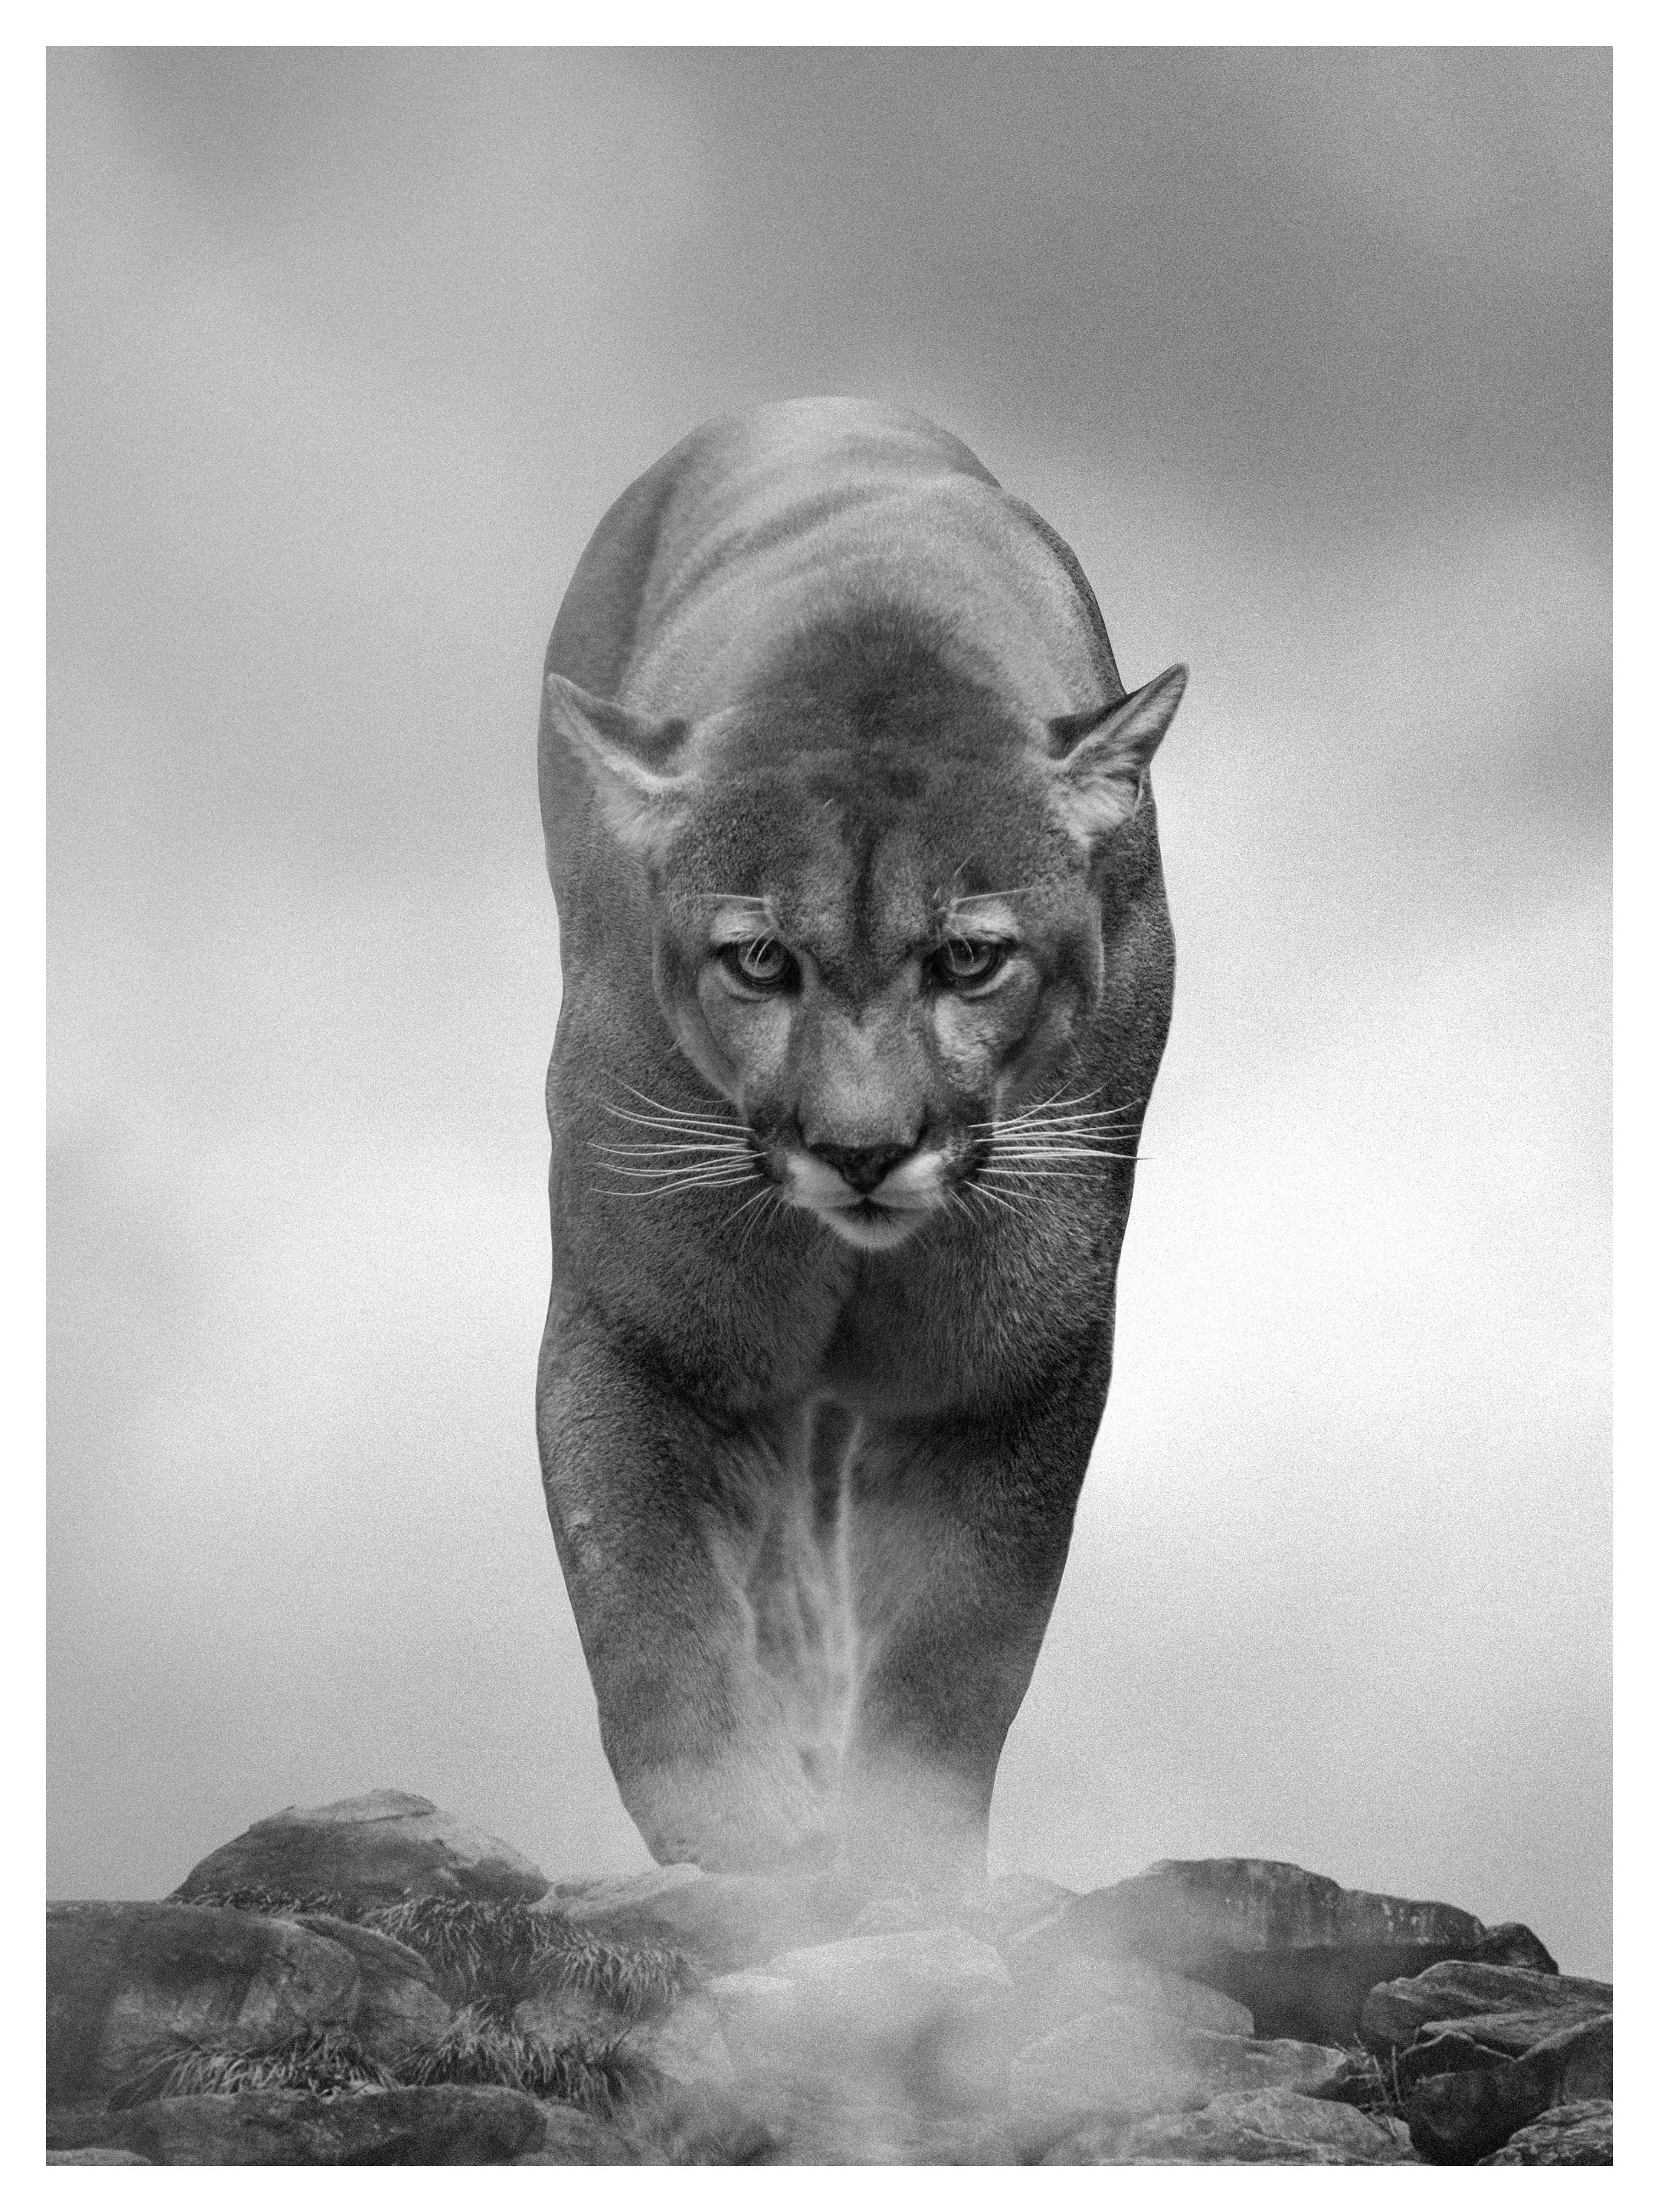 Shane Russeck Animal Print - King of the Mountain - 36x48 Black and White Photography, Cougar, Mountain Lion